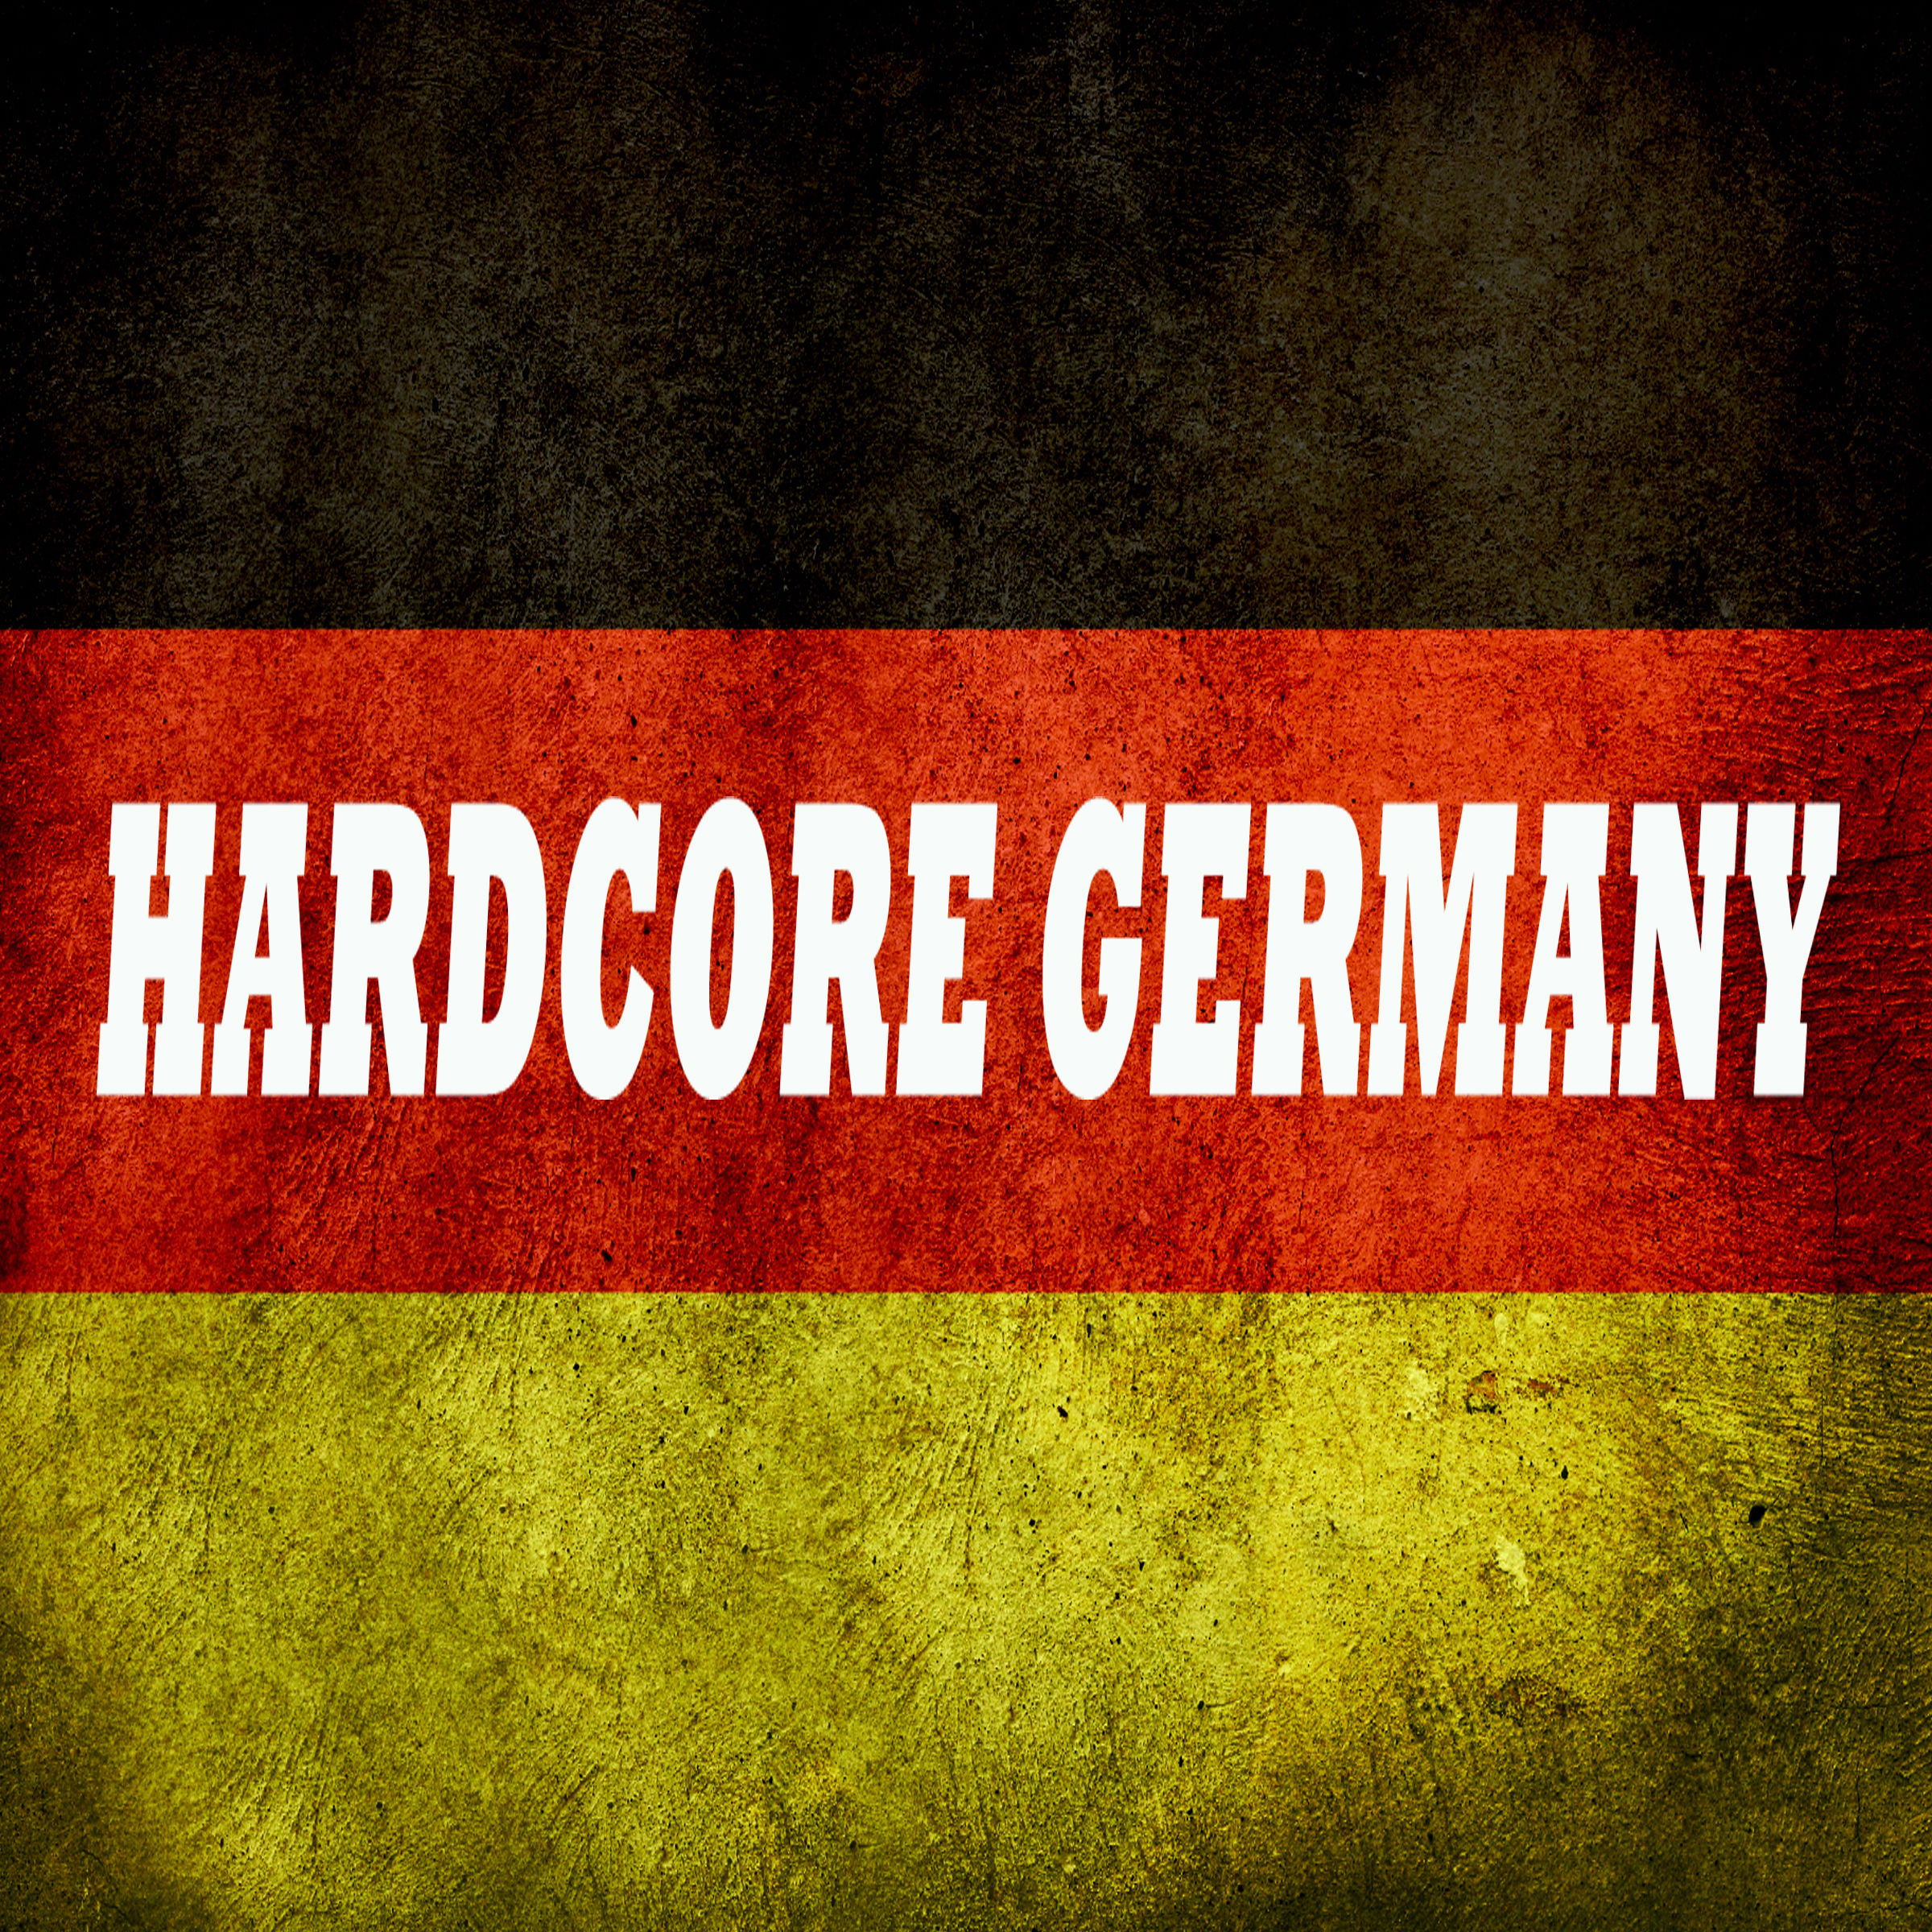 Harcore Germany